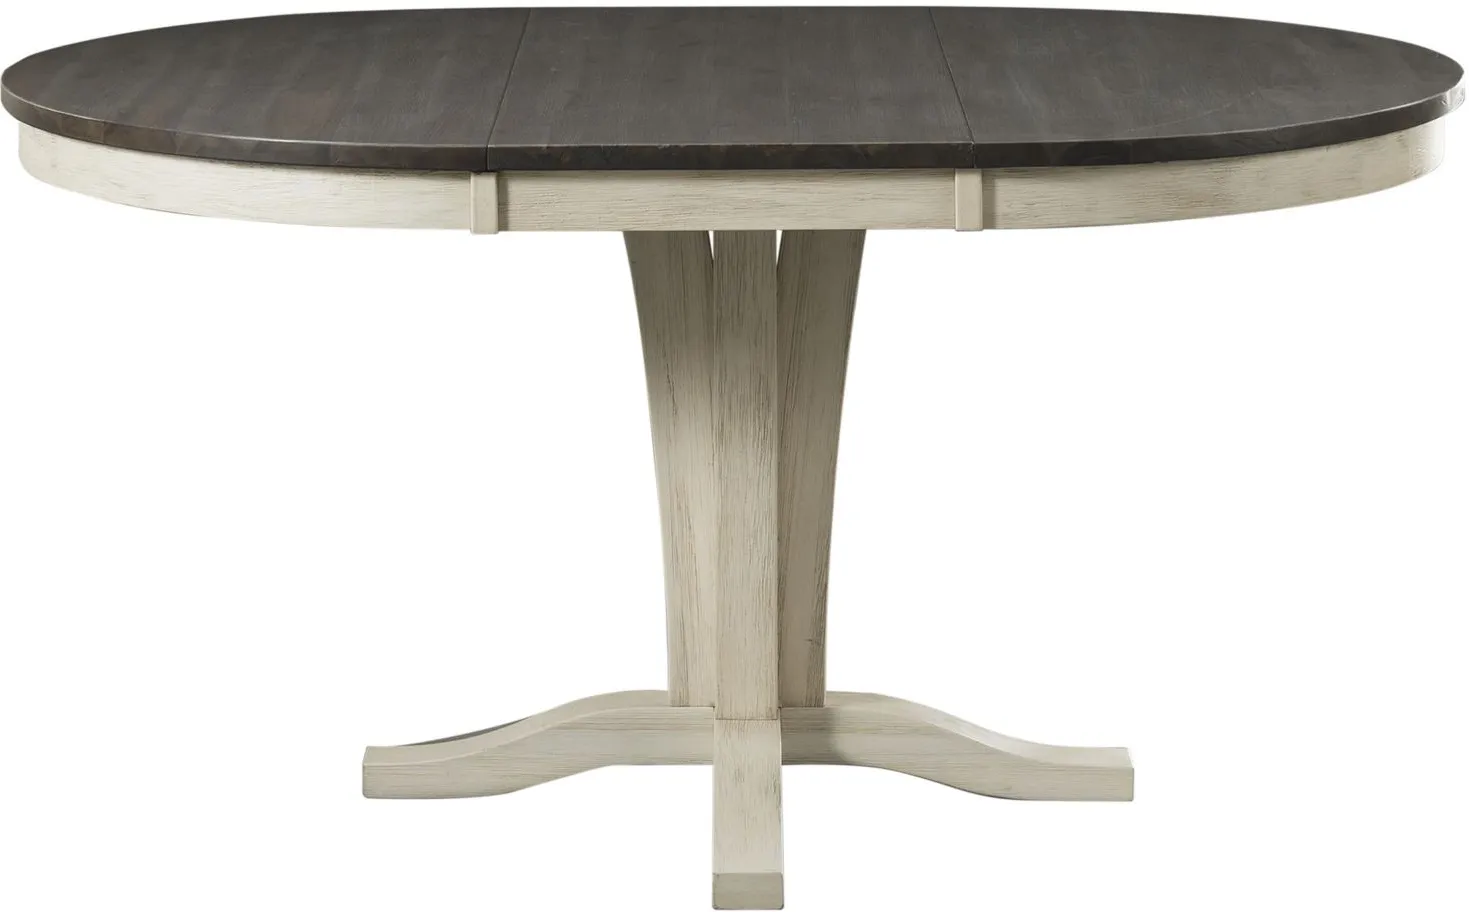 Huron Round Single Leaf Dining Table in Chalk-Cocoa Bean by A-America